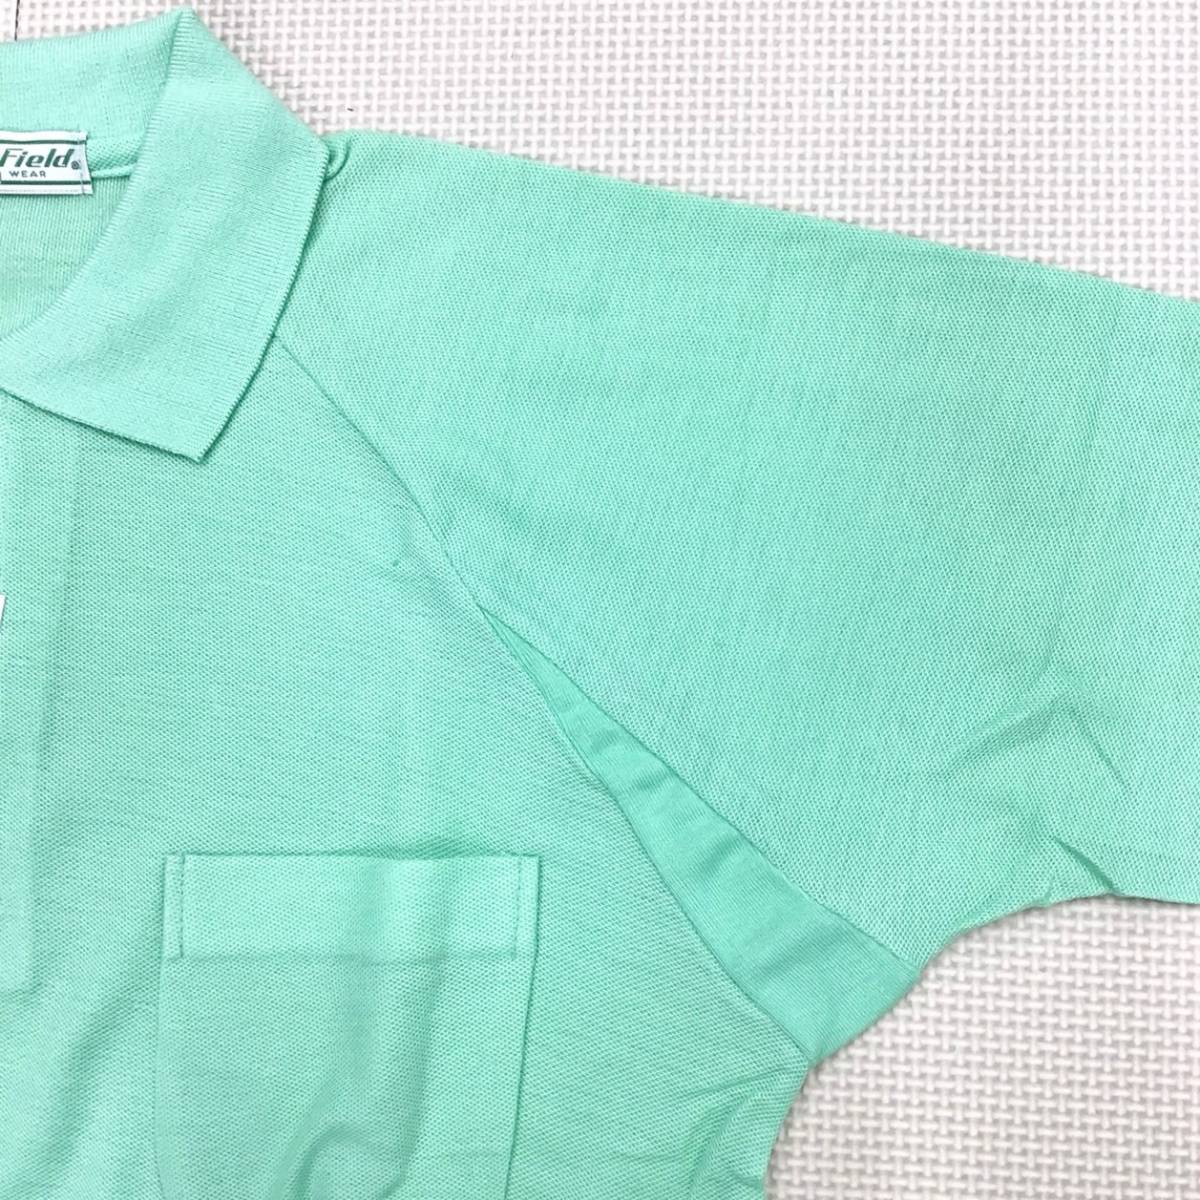 ( unused goods ) Plum Field polo-shirt with short sleeves size M / light green / green / made in Japan / with pocket / uniform / work clothes / working clothes / sport wear 